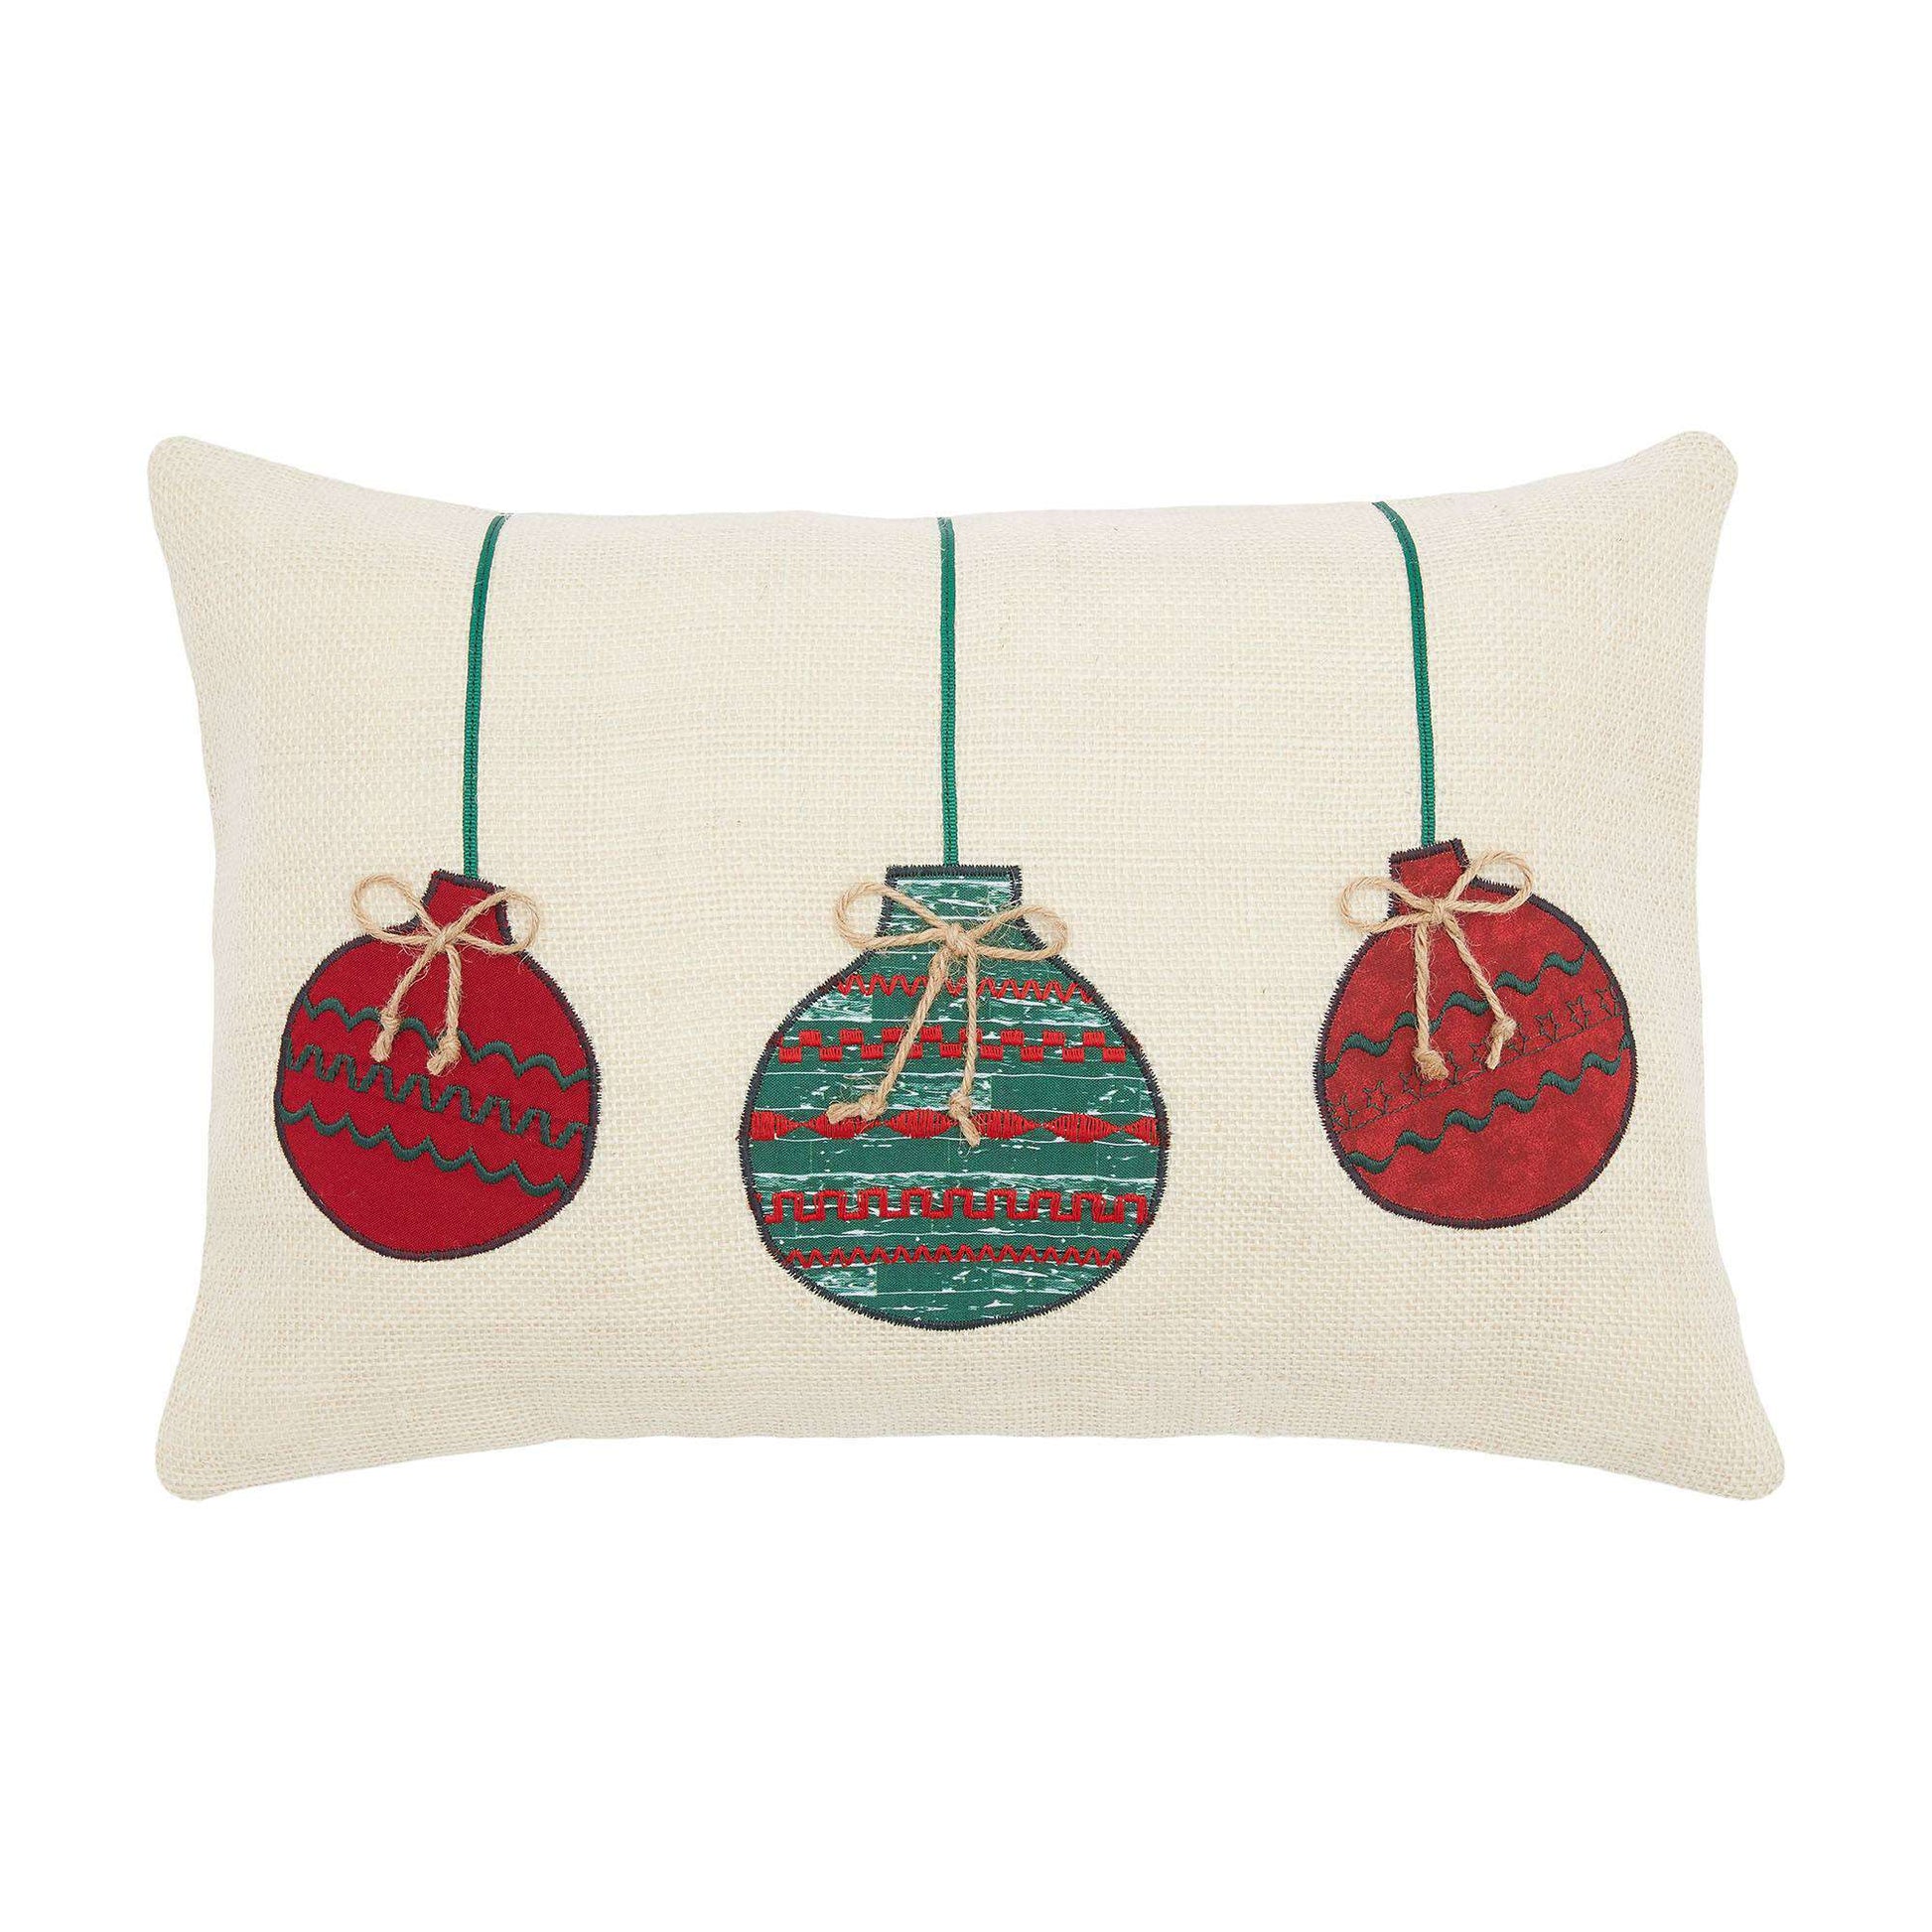 Free Coats Sewing & Clark Ornament Trio Pillow Pattern